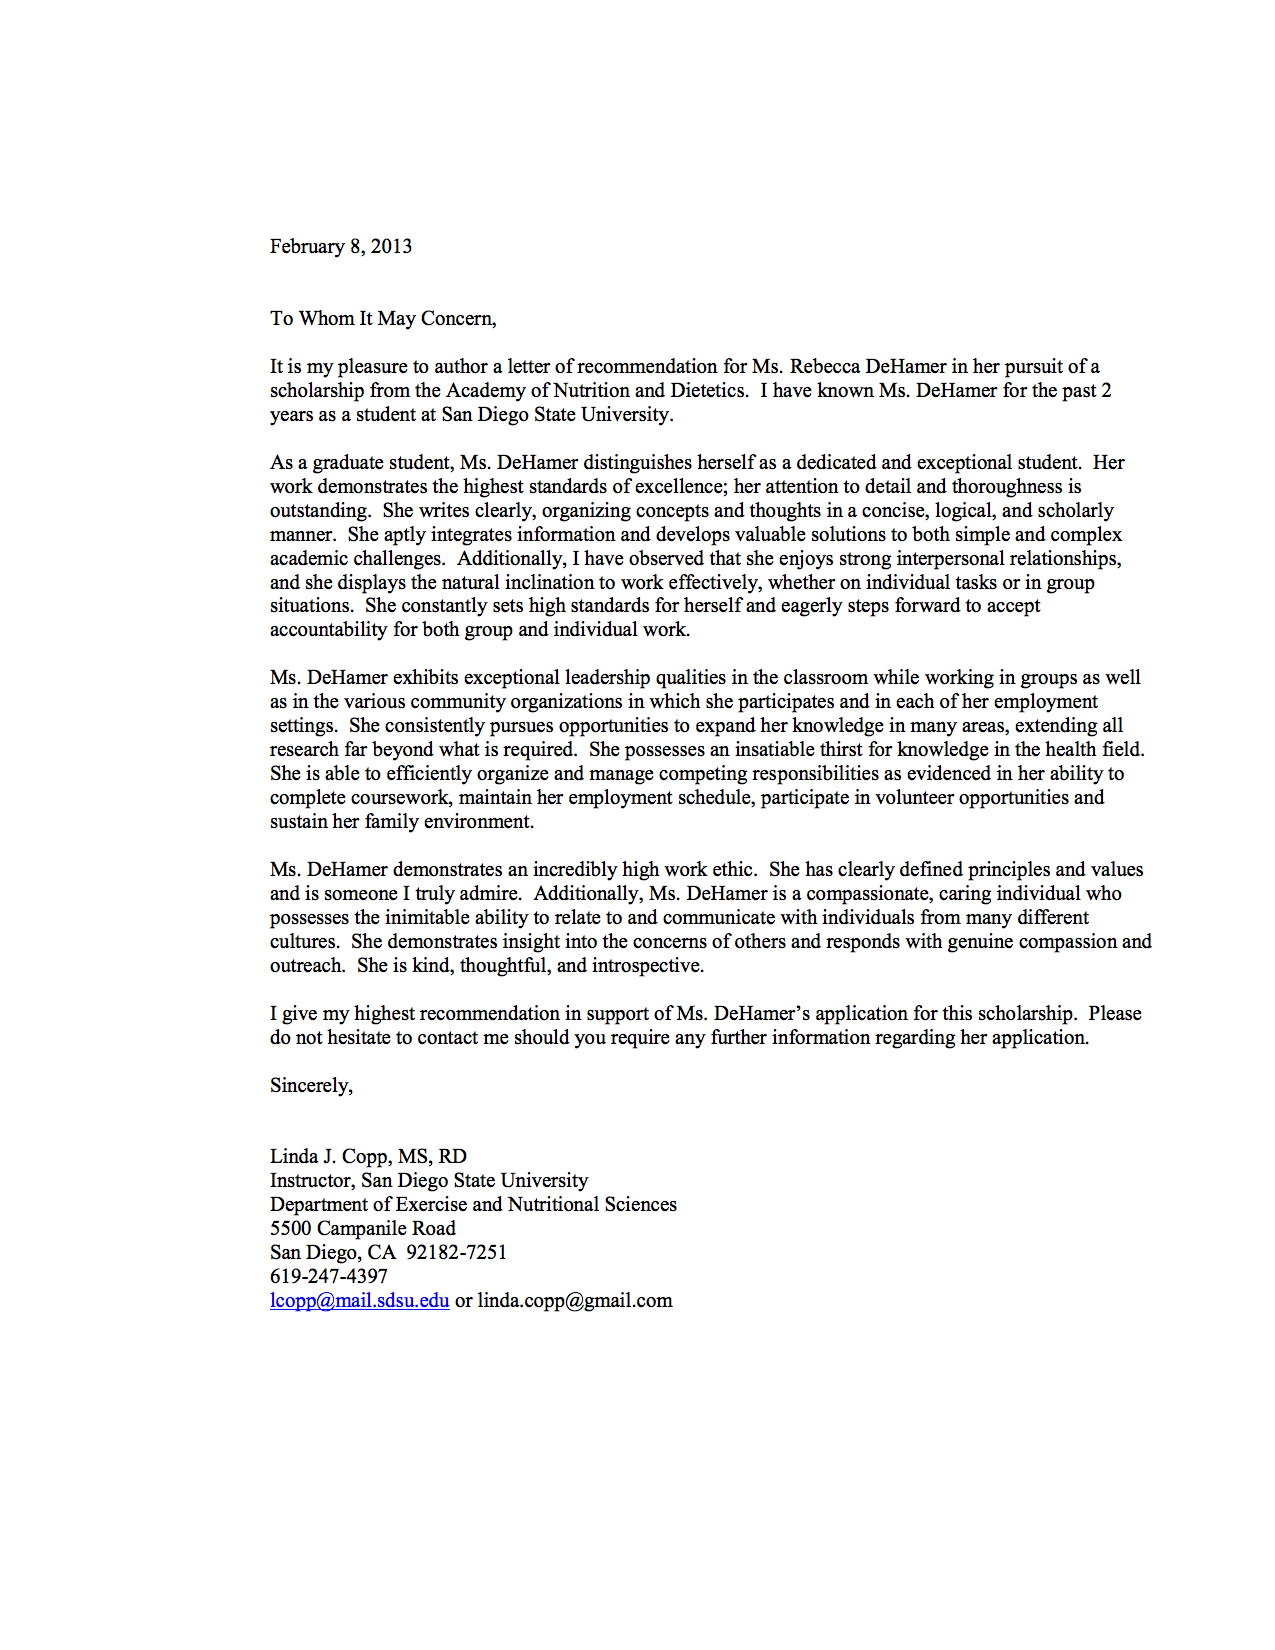 Sample Recommendation Letter For Scholarship From Professor inside dimensions 1275 X 1650